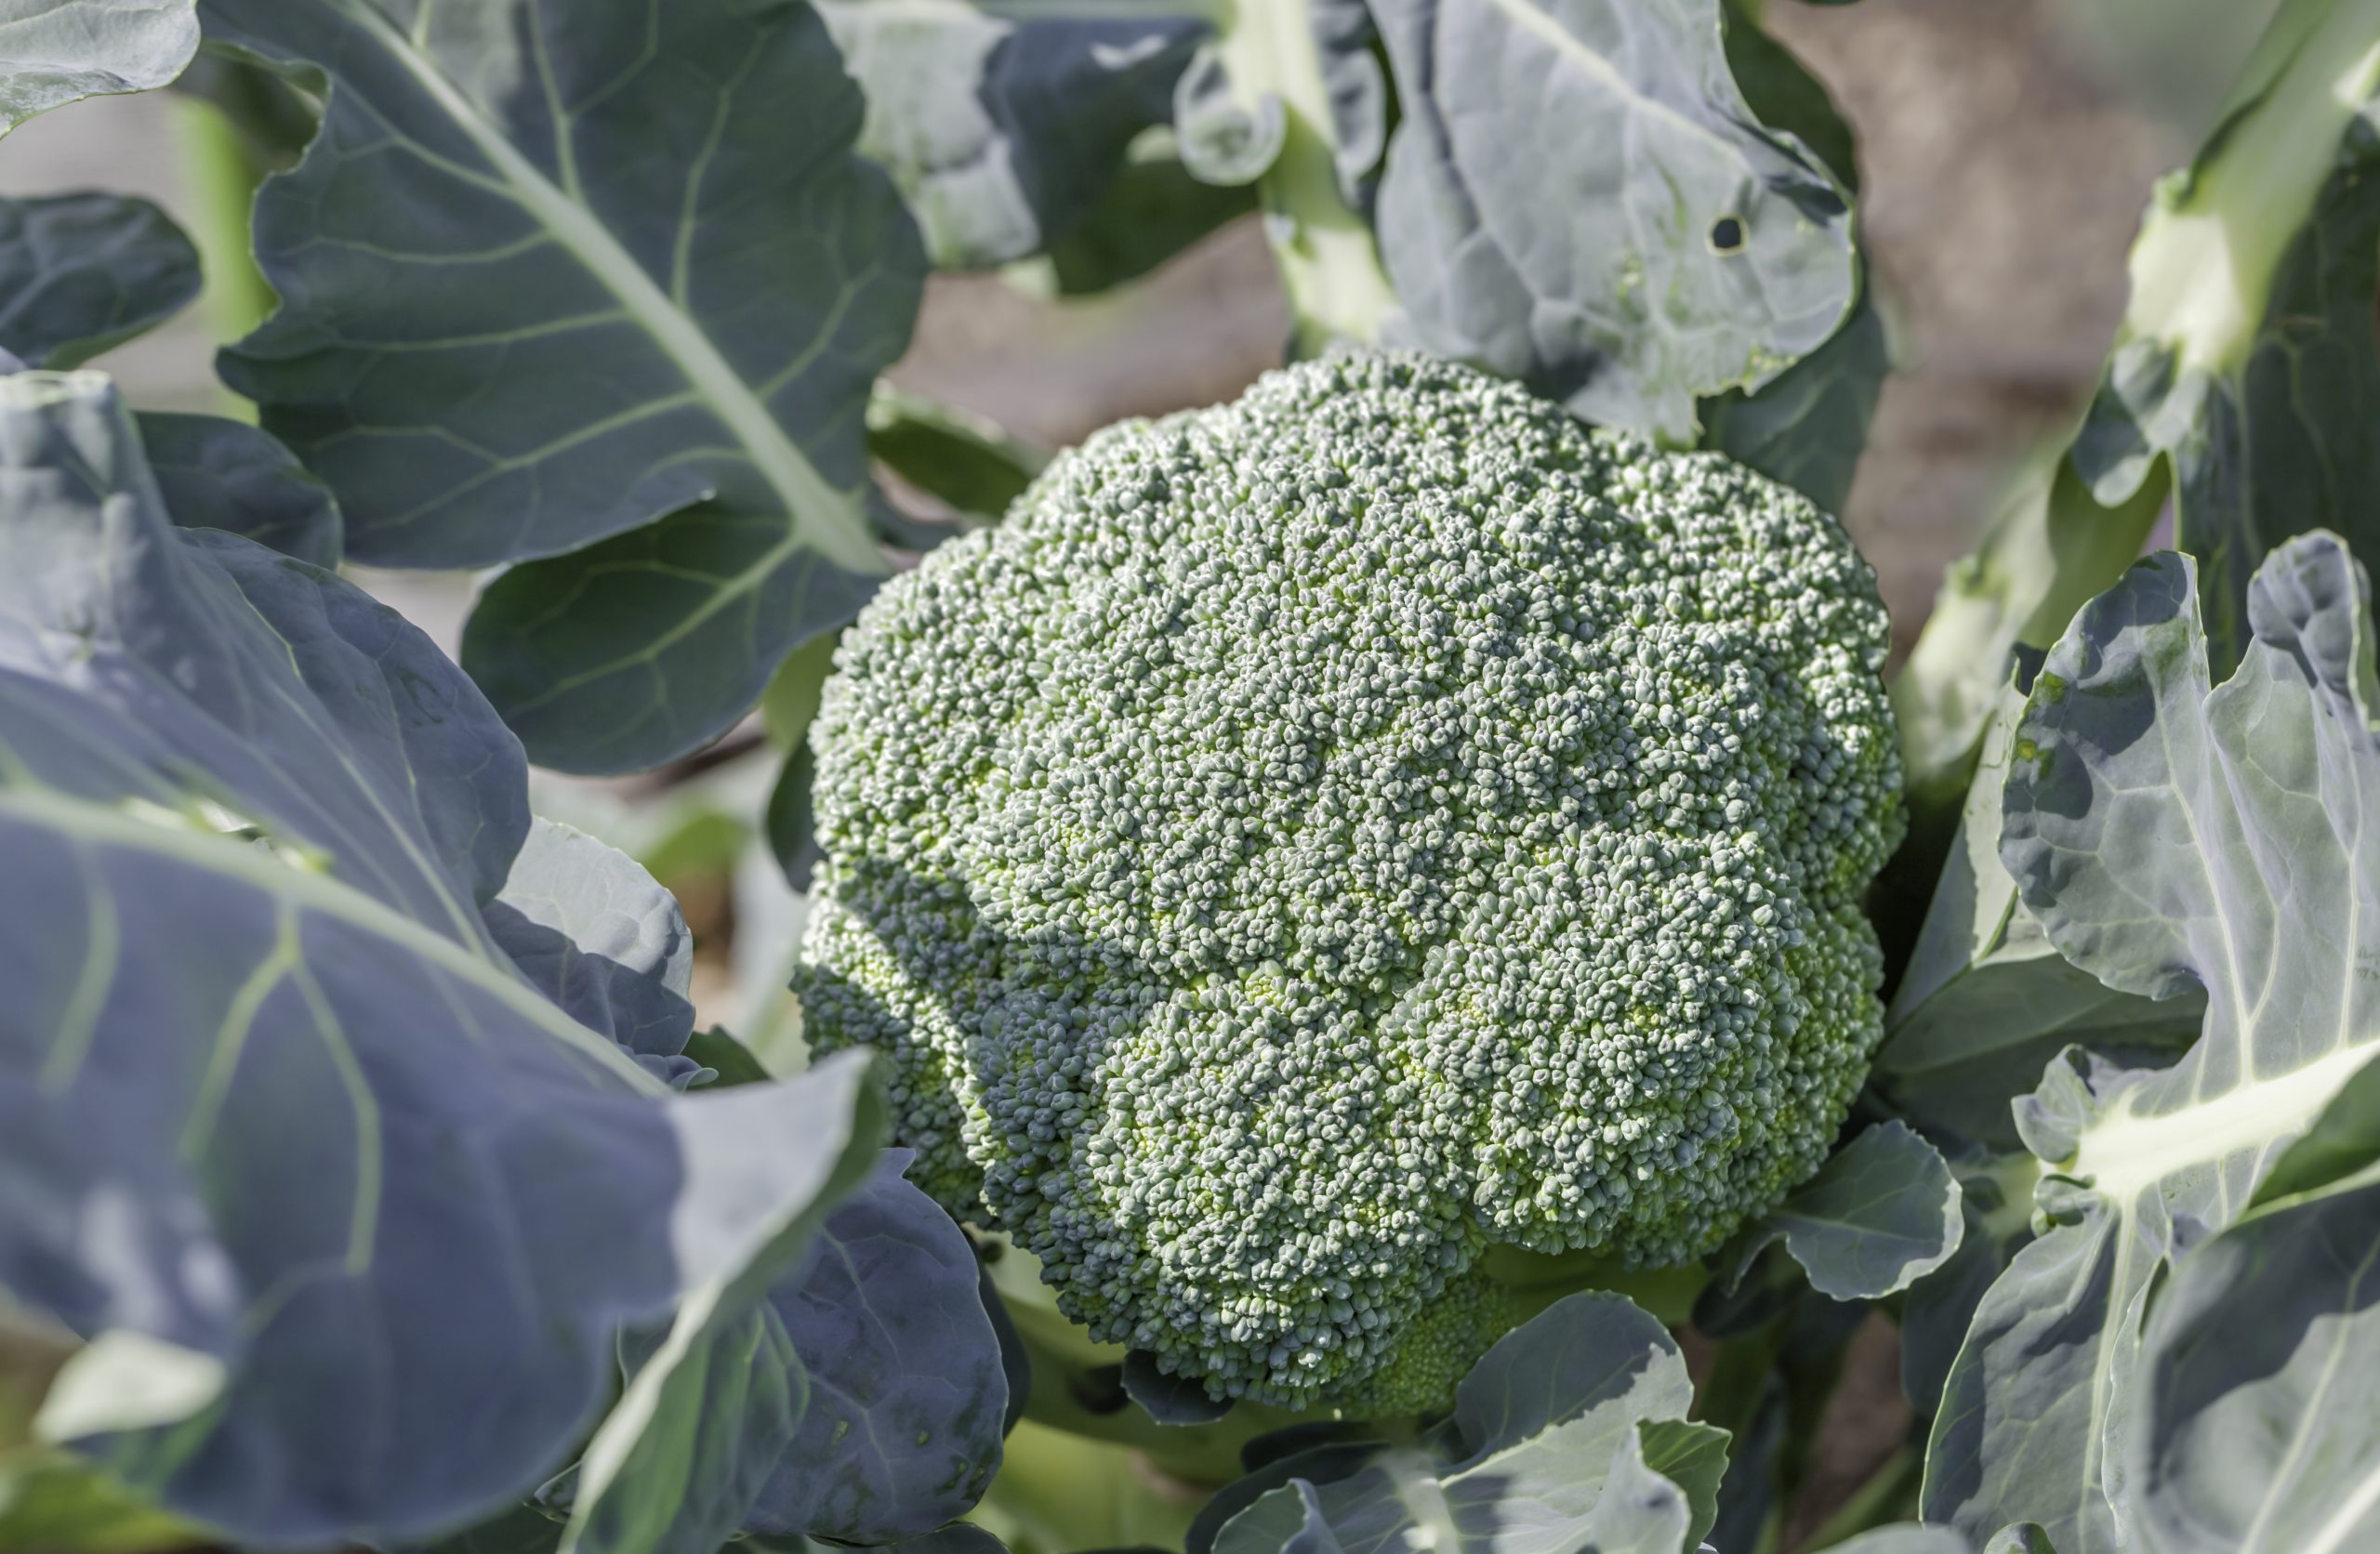 when to harvest Broccoli